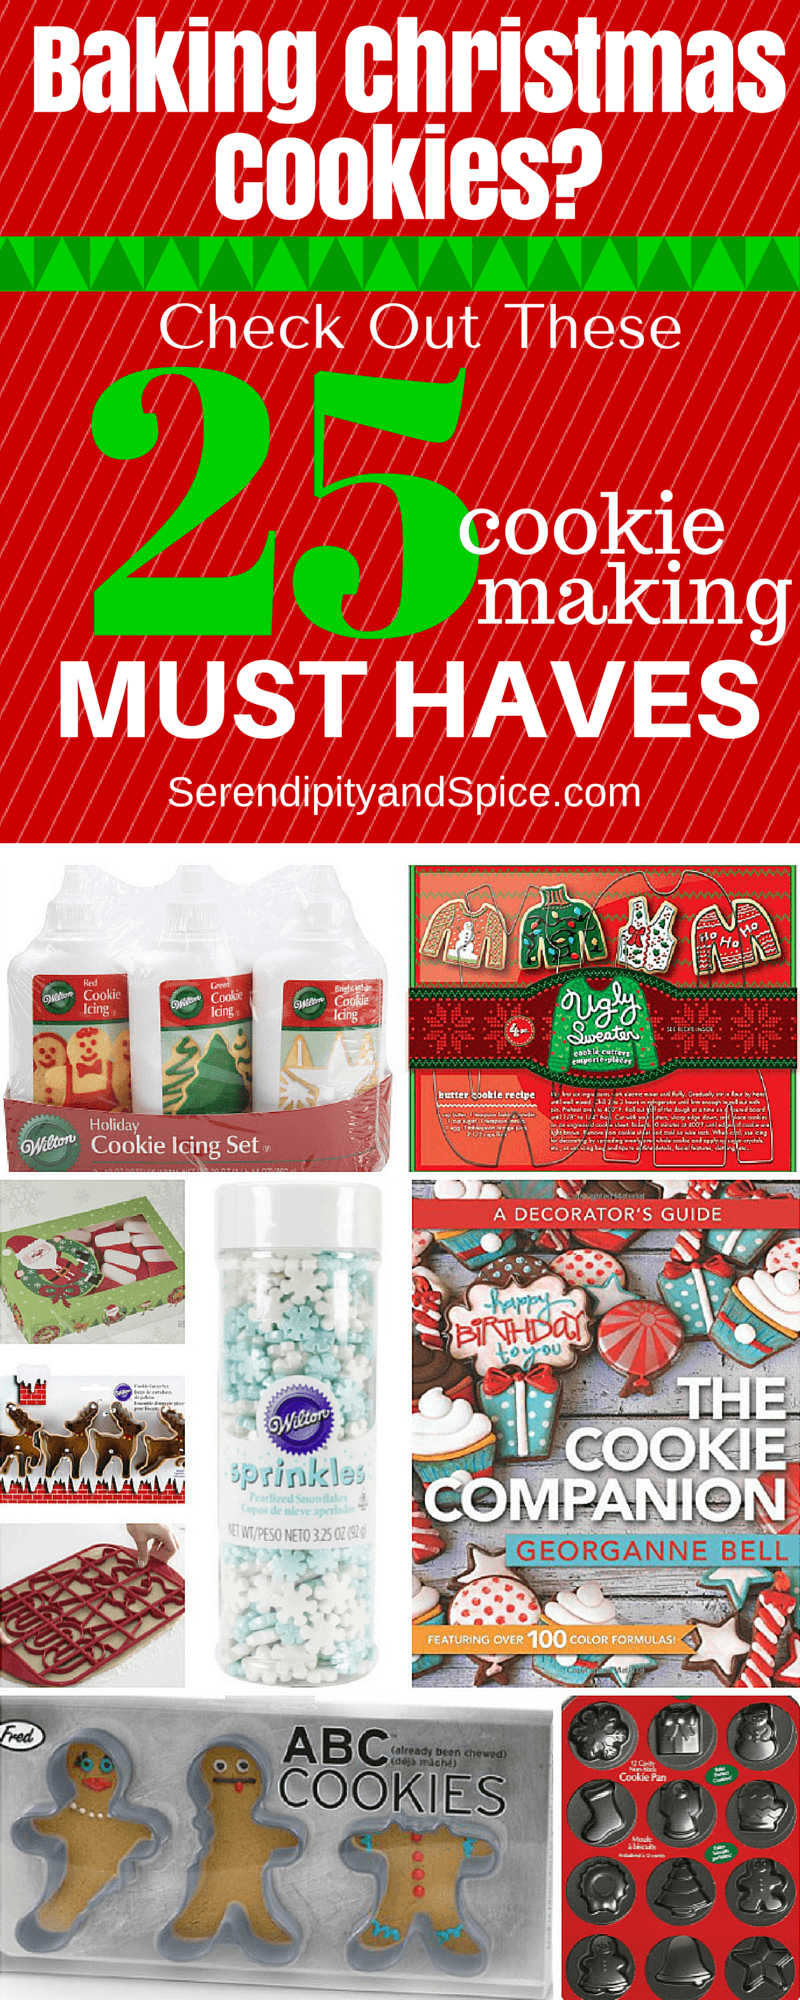 http://serendipityandspice.com/wp-content/uploads/2015/11/cookie-making-must-haves.png